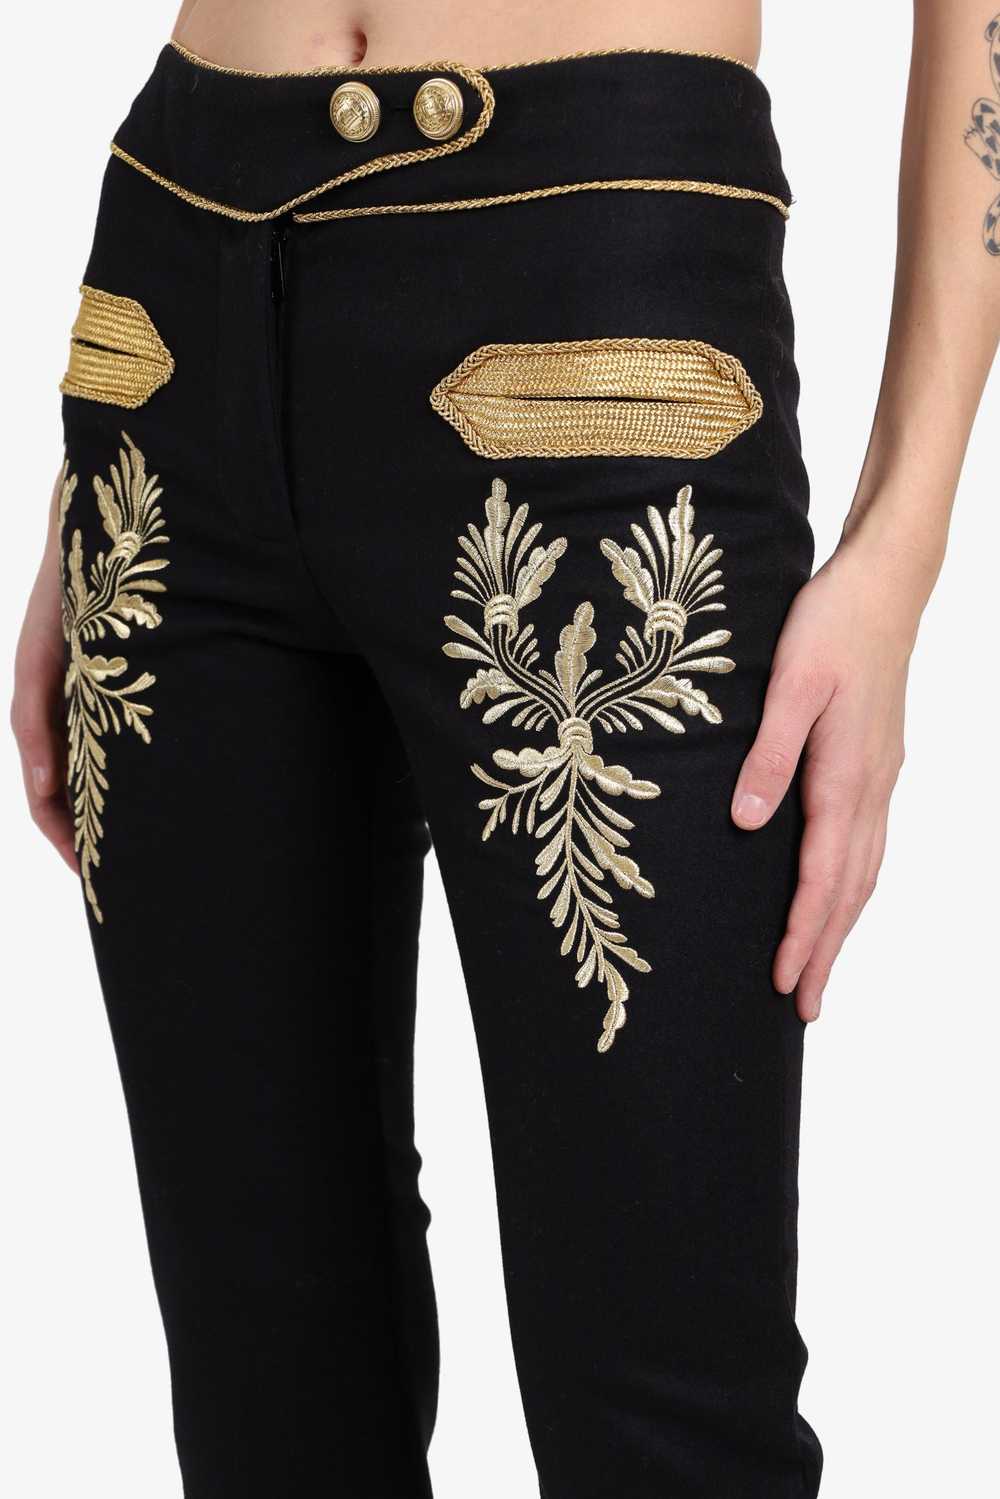 Paco Rabanne Black Wool Gold Embroidered Pants Si… - image 4